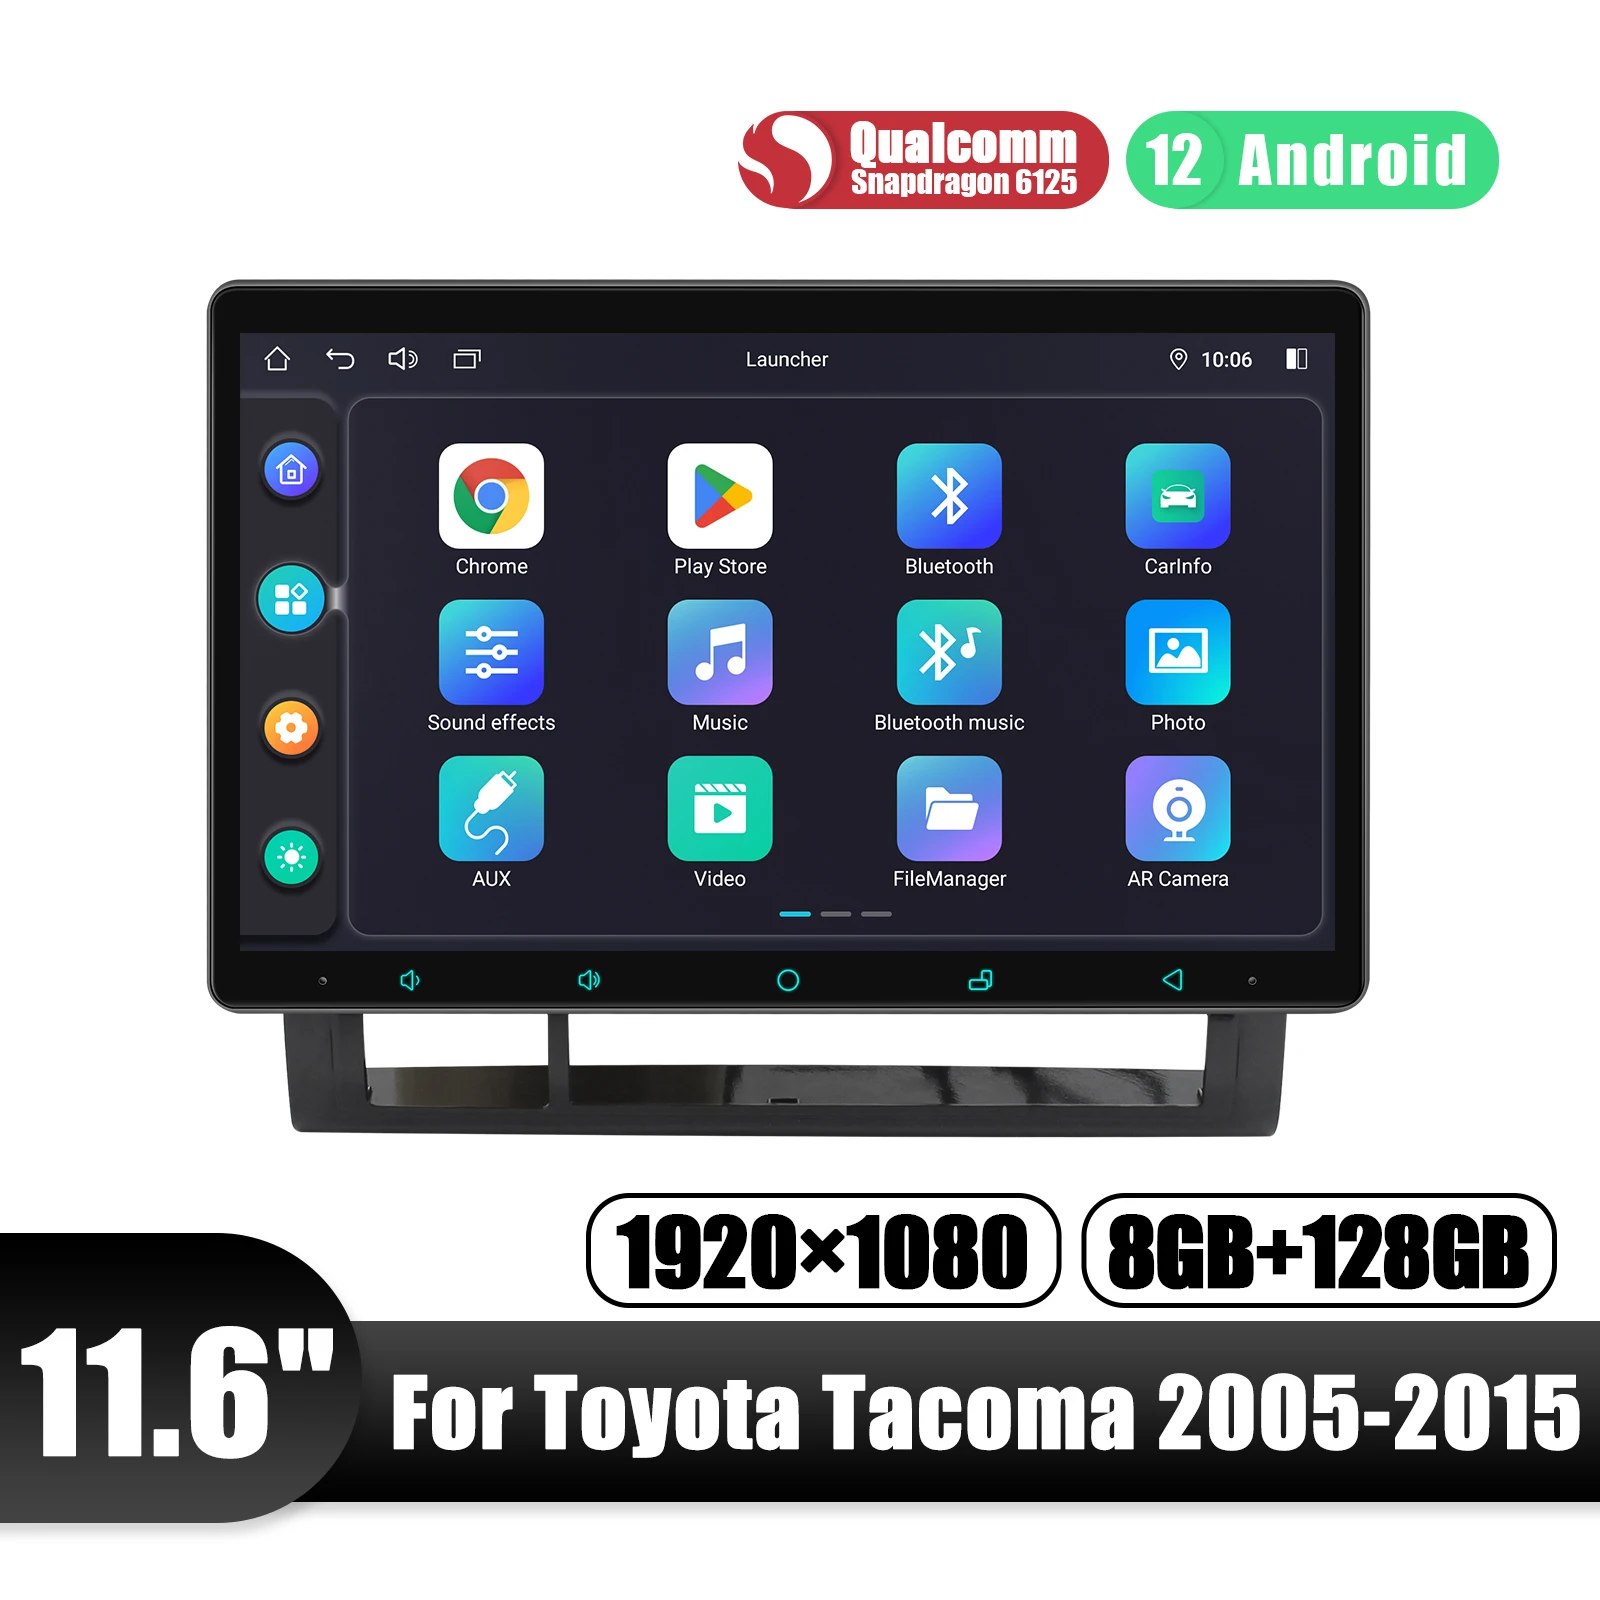 

Joying After-Market Android 12 Car Radio Stereo 11.6" 8G 128G For Toyota Tacoma 2005-2015 With Qualcomm Snapdragon processor